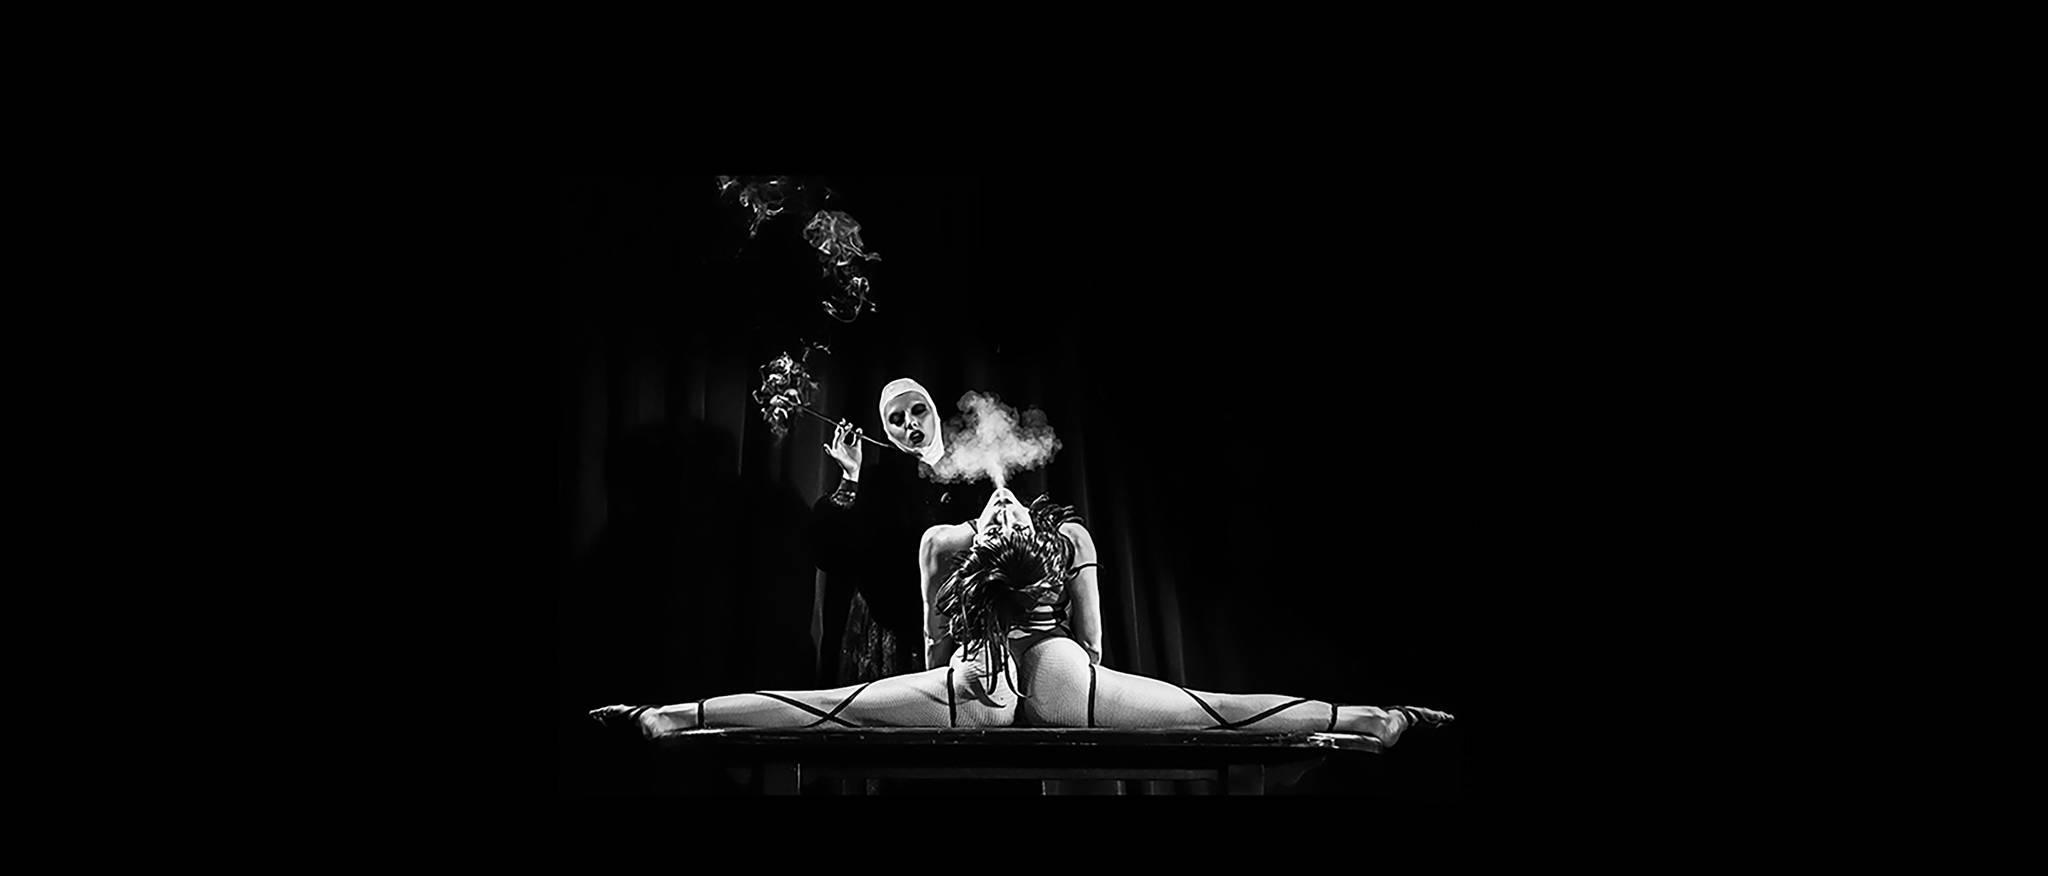 A smokin’ hot number by Valtesse. Photo by Jules Doyle